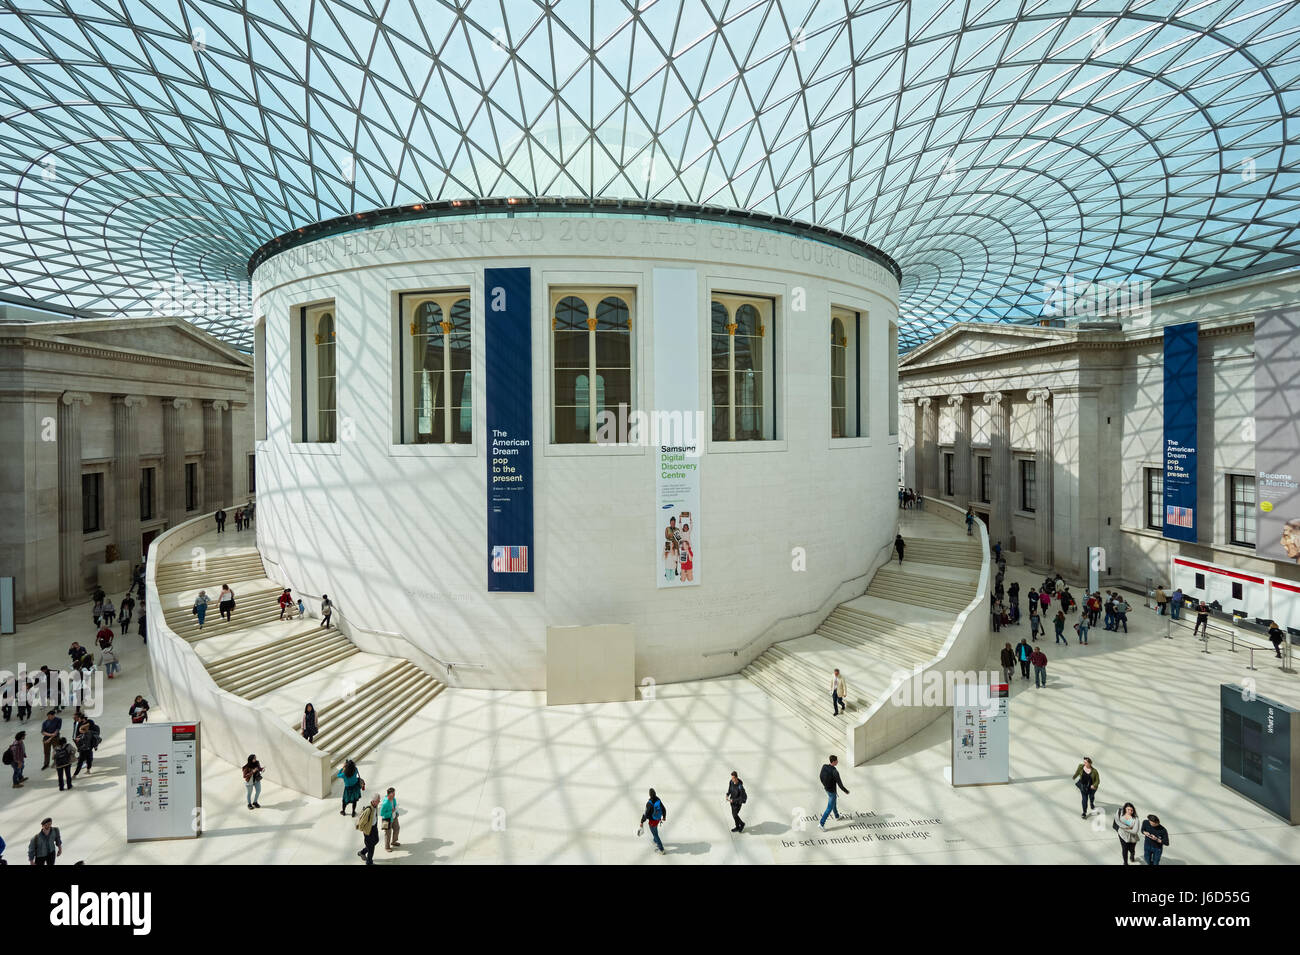 The Queen Elizabeth II Great Court at the British Museum, London England United Kingdom UK Stock Photo